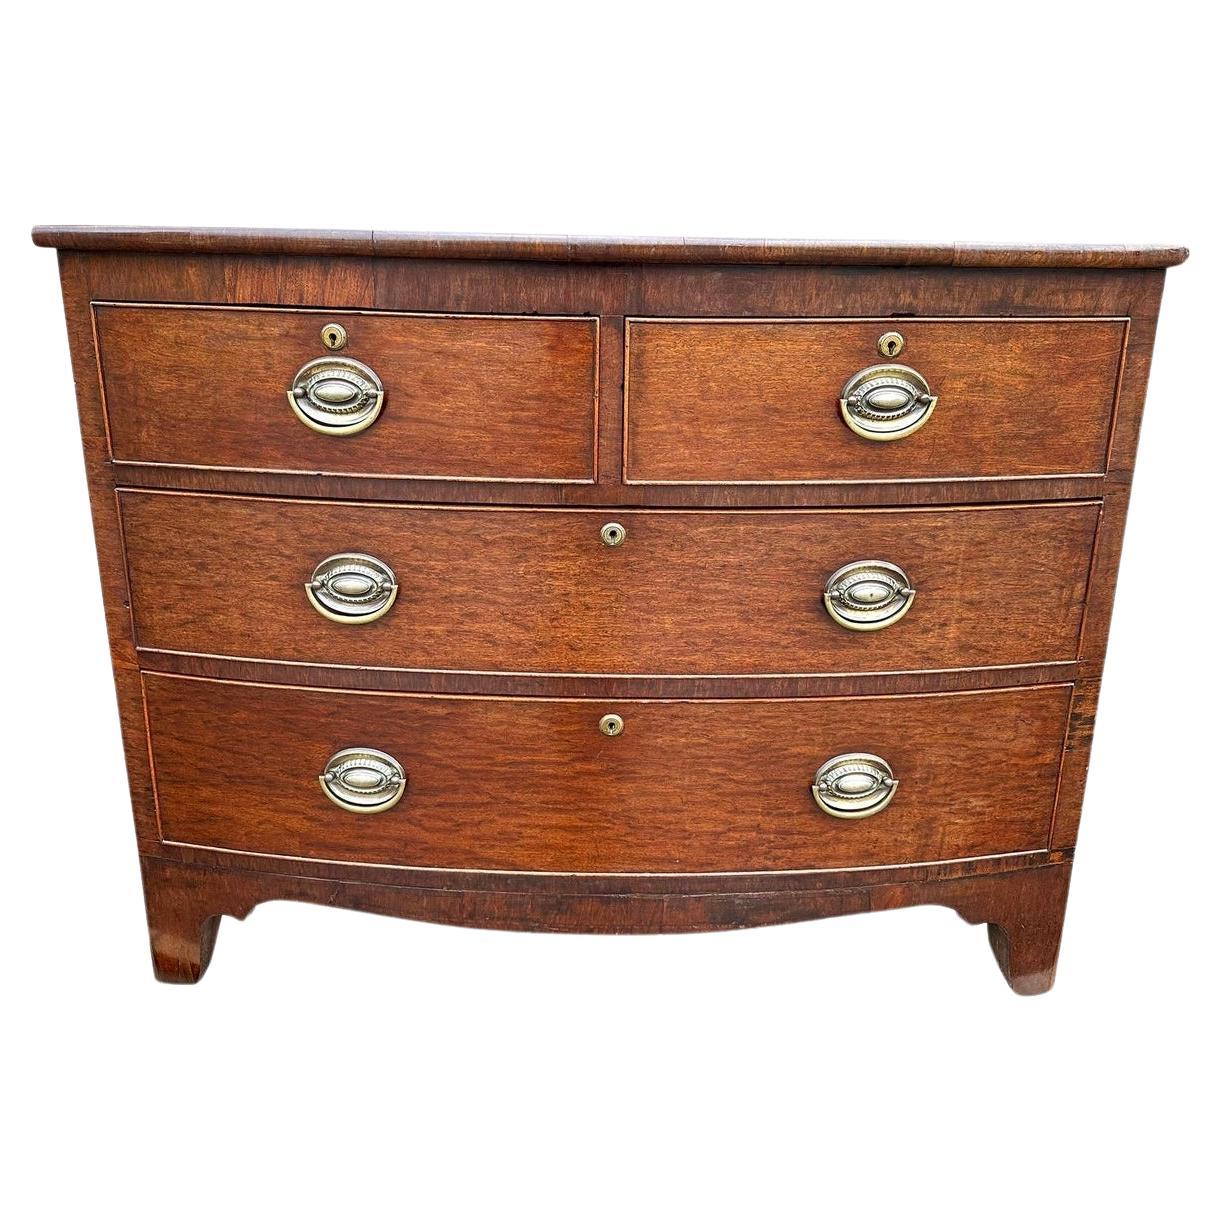 19th Century English Bowfront Chest